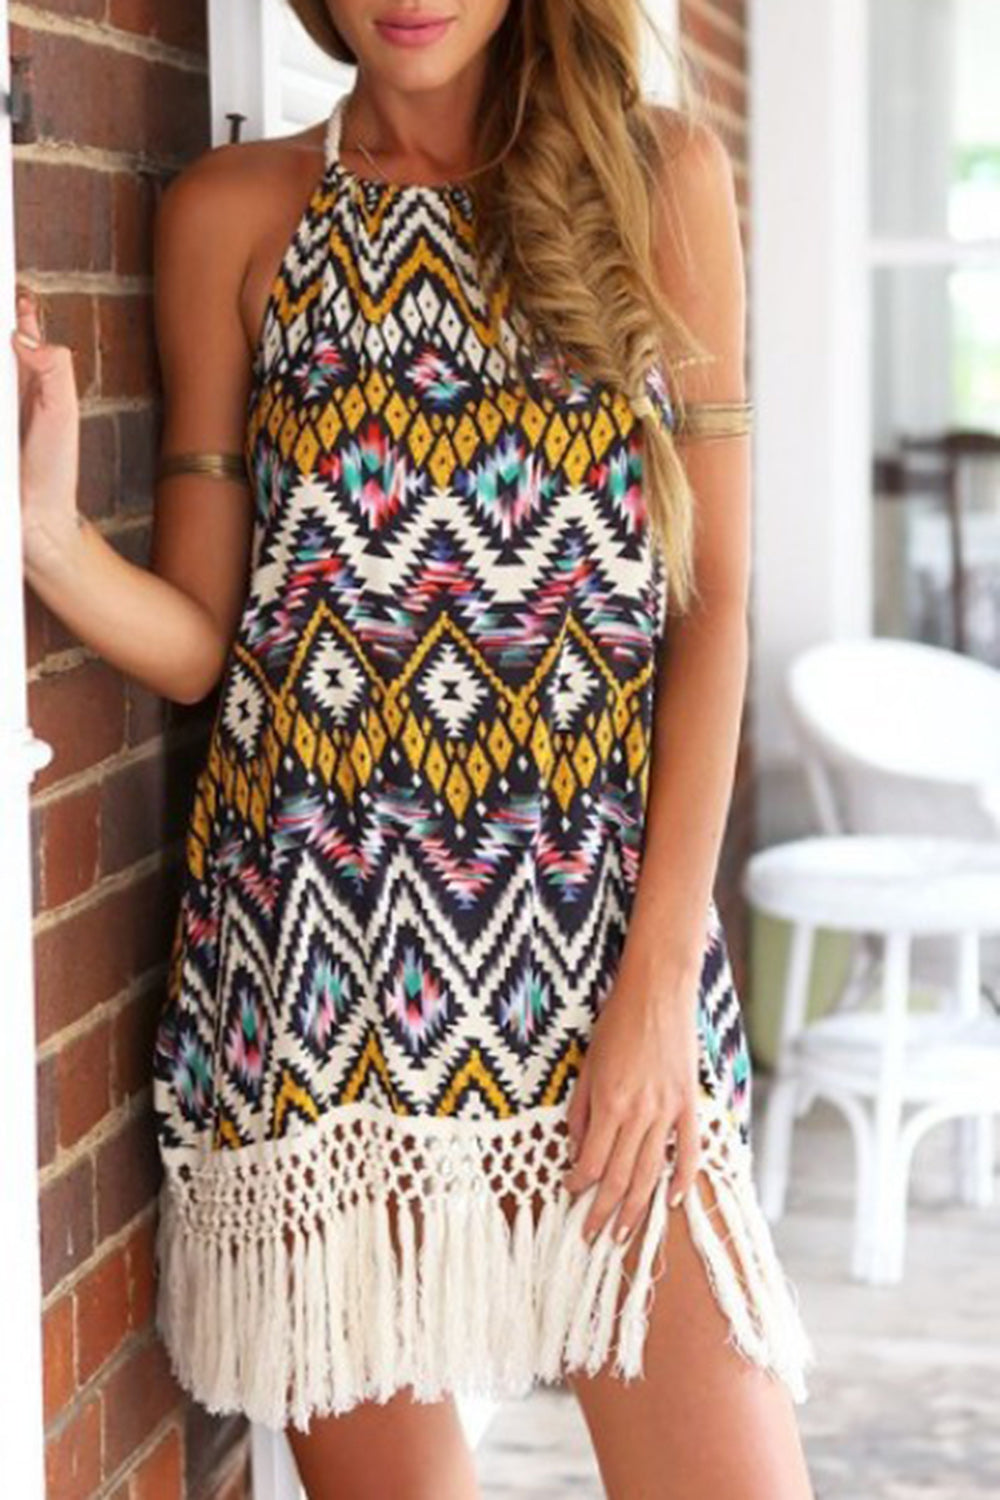 Stylish halter neck mini dress with vibrant print and playful tassels, perfect for any occasion. Chic, comfortable, and versatile.